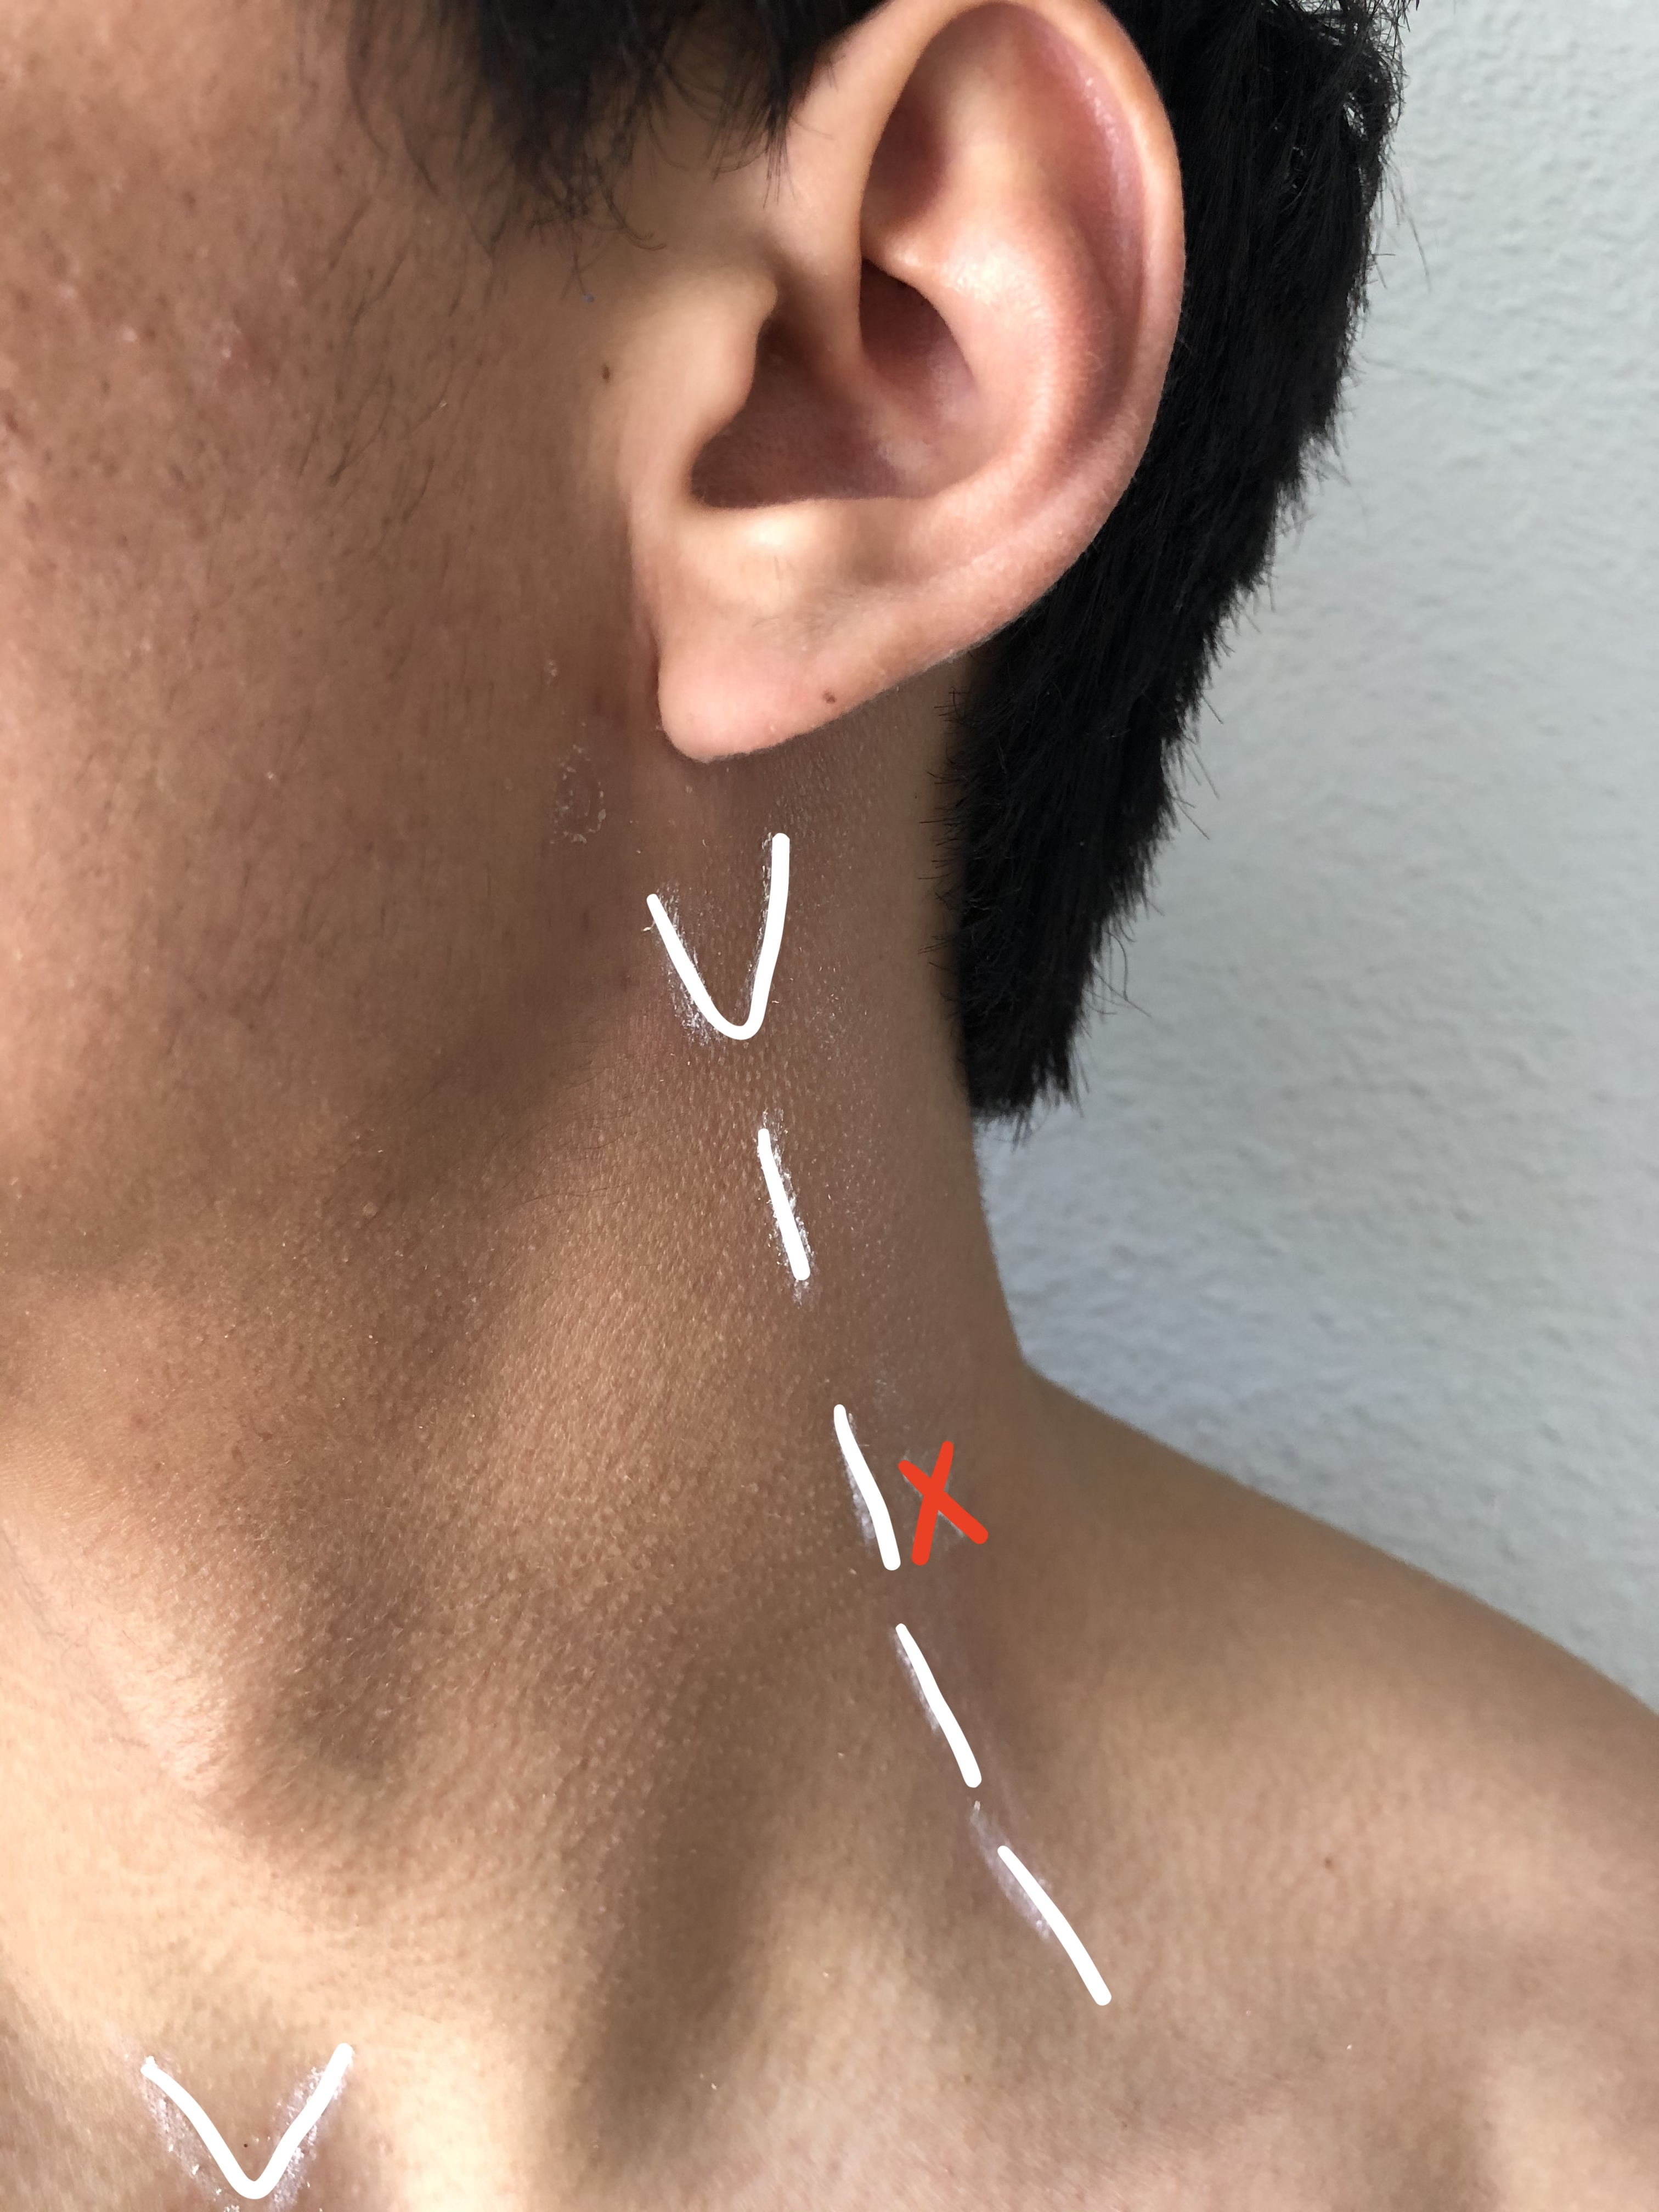 The white "V" inferior to earlobe is over the mastoid process